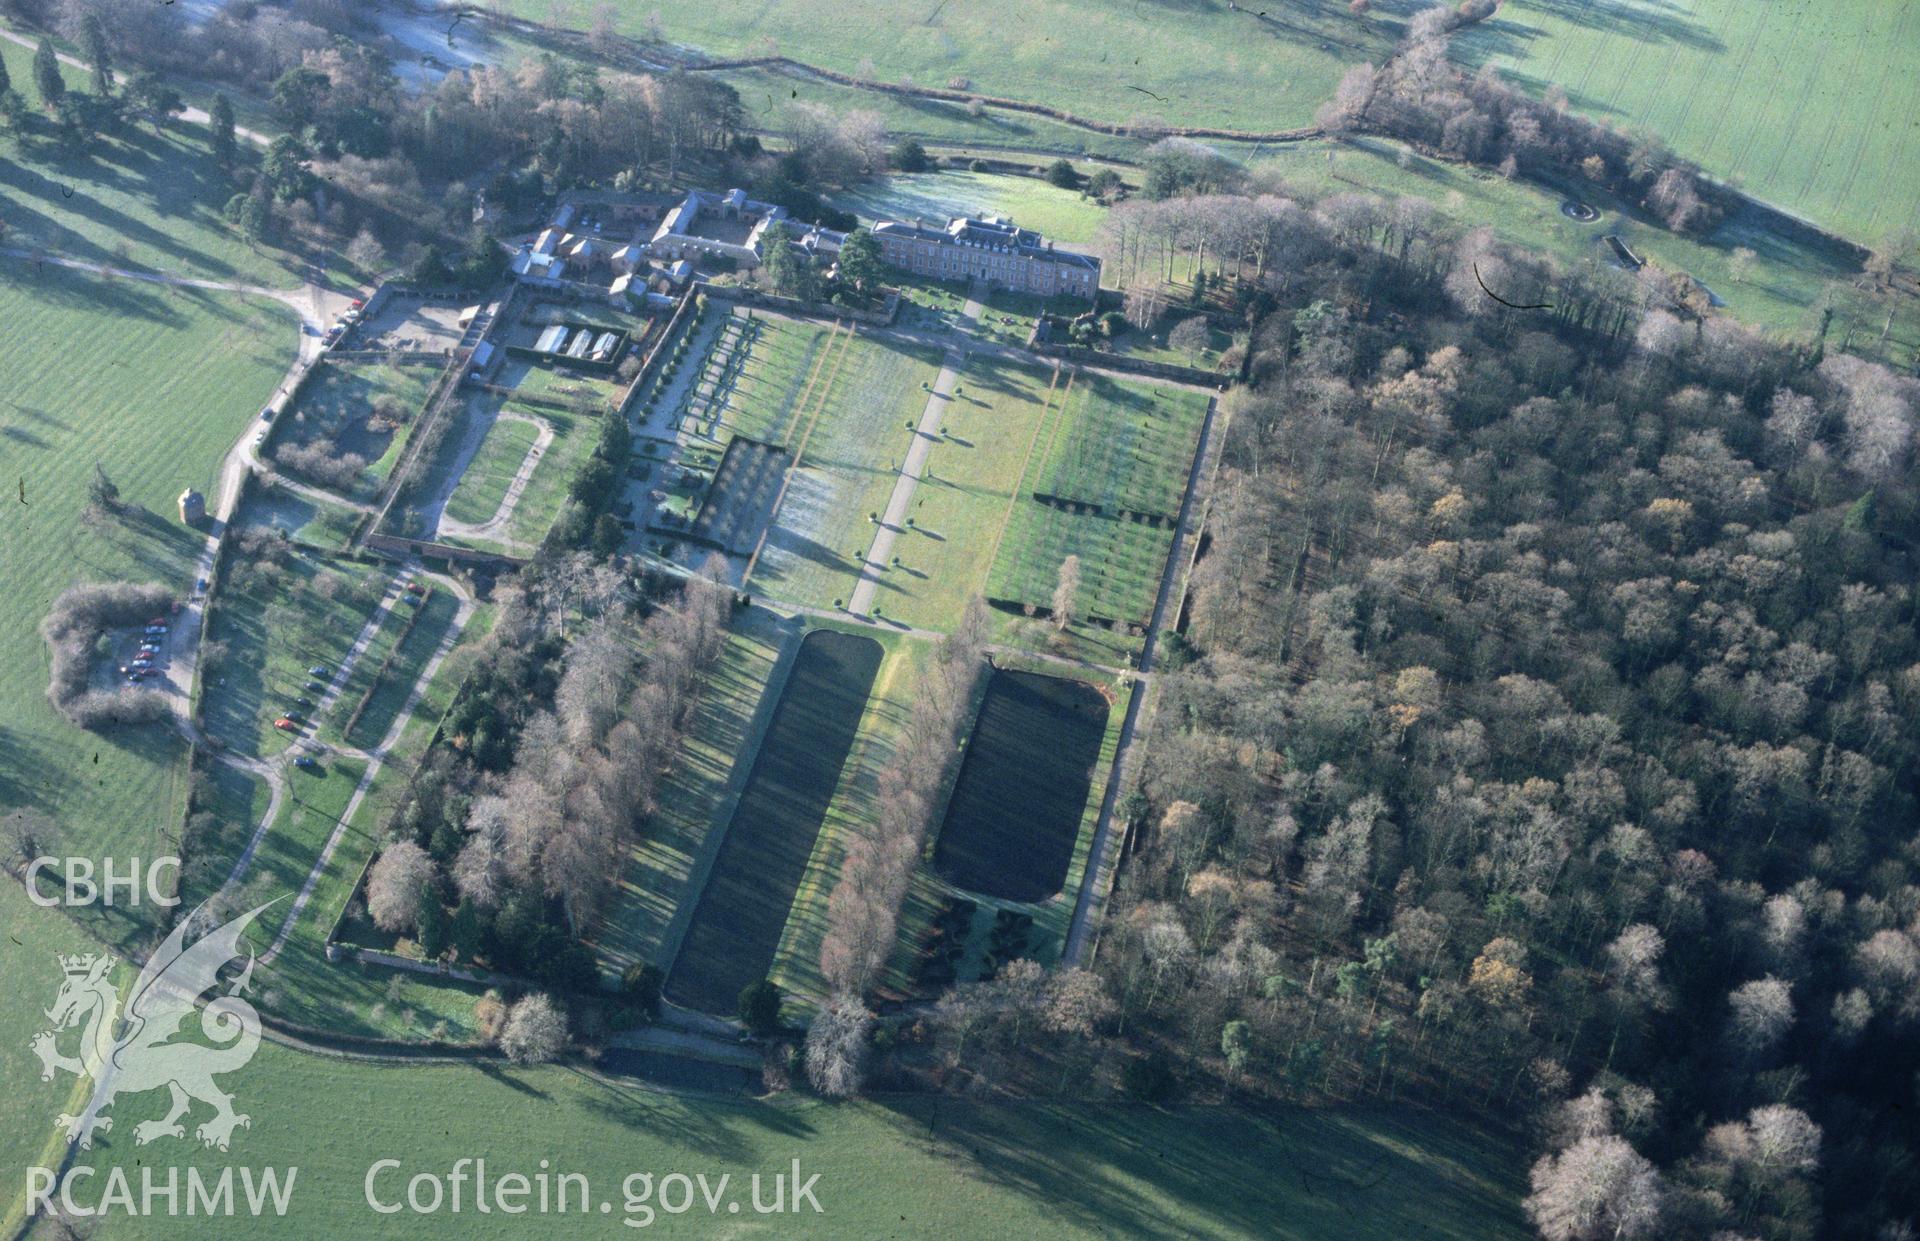 Slide of RCAHMW colour oblique aerial photograph of Erddig Hall;erthig Hall, taken by C.R. Musson, 22/12/1996.